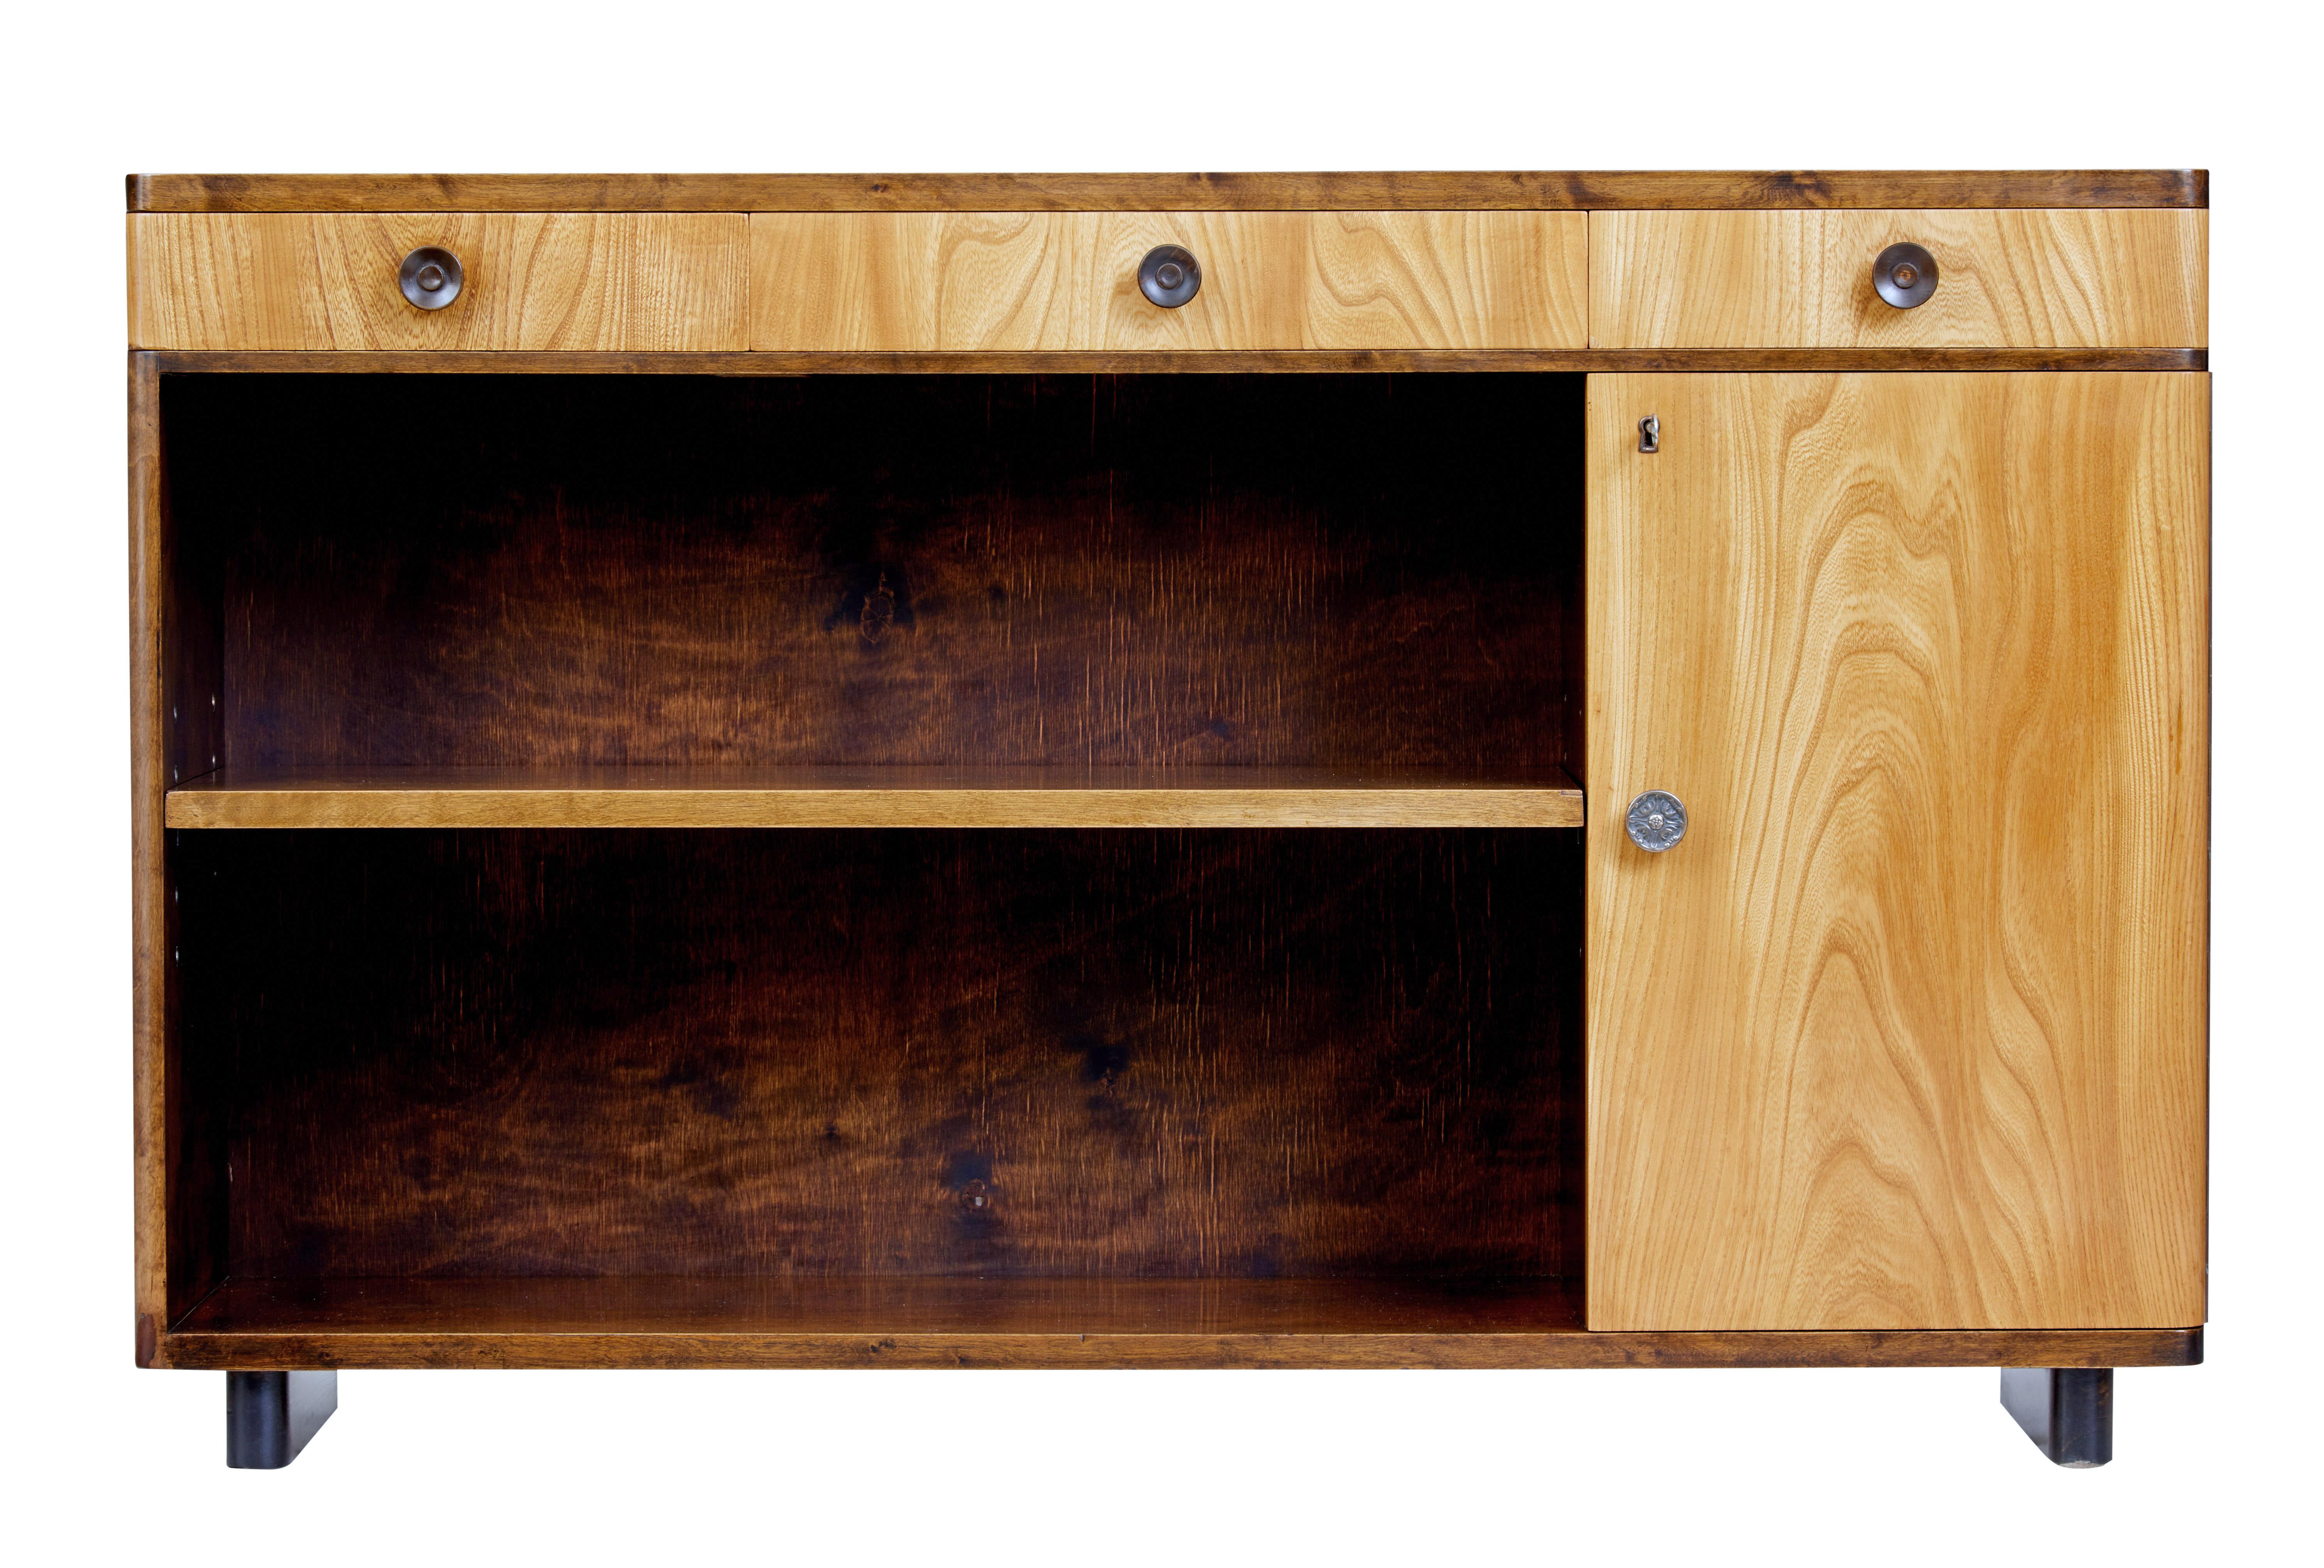 Fine mid-20th century Scandinavian elm and birch low bookcase, circa 1940.

Fine quality late art deco low bookcase.

Beautifully presented in a dark birch with light elm doors and drawers.

3 drawers under the top surface with turned wooden